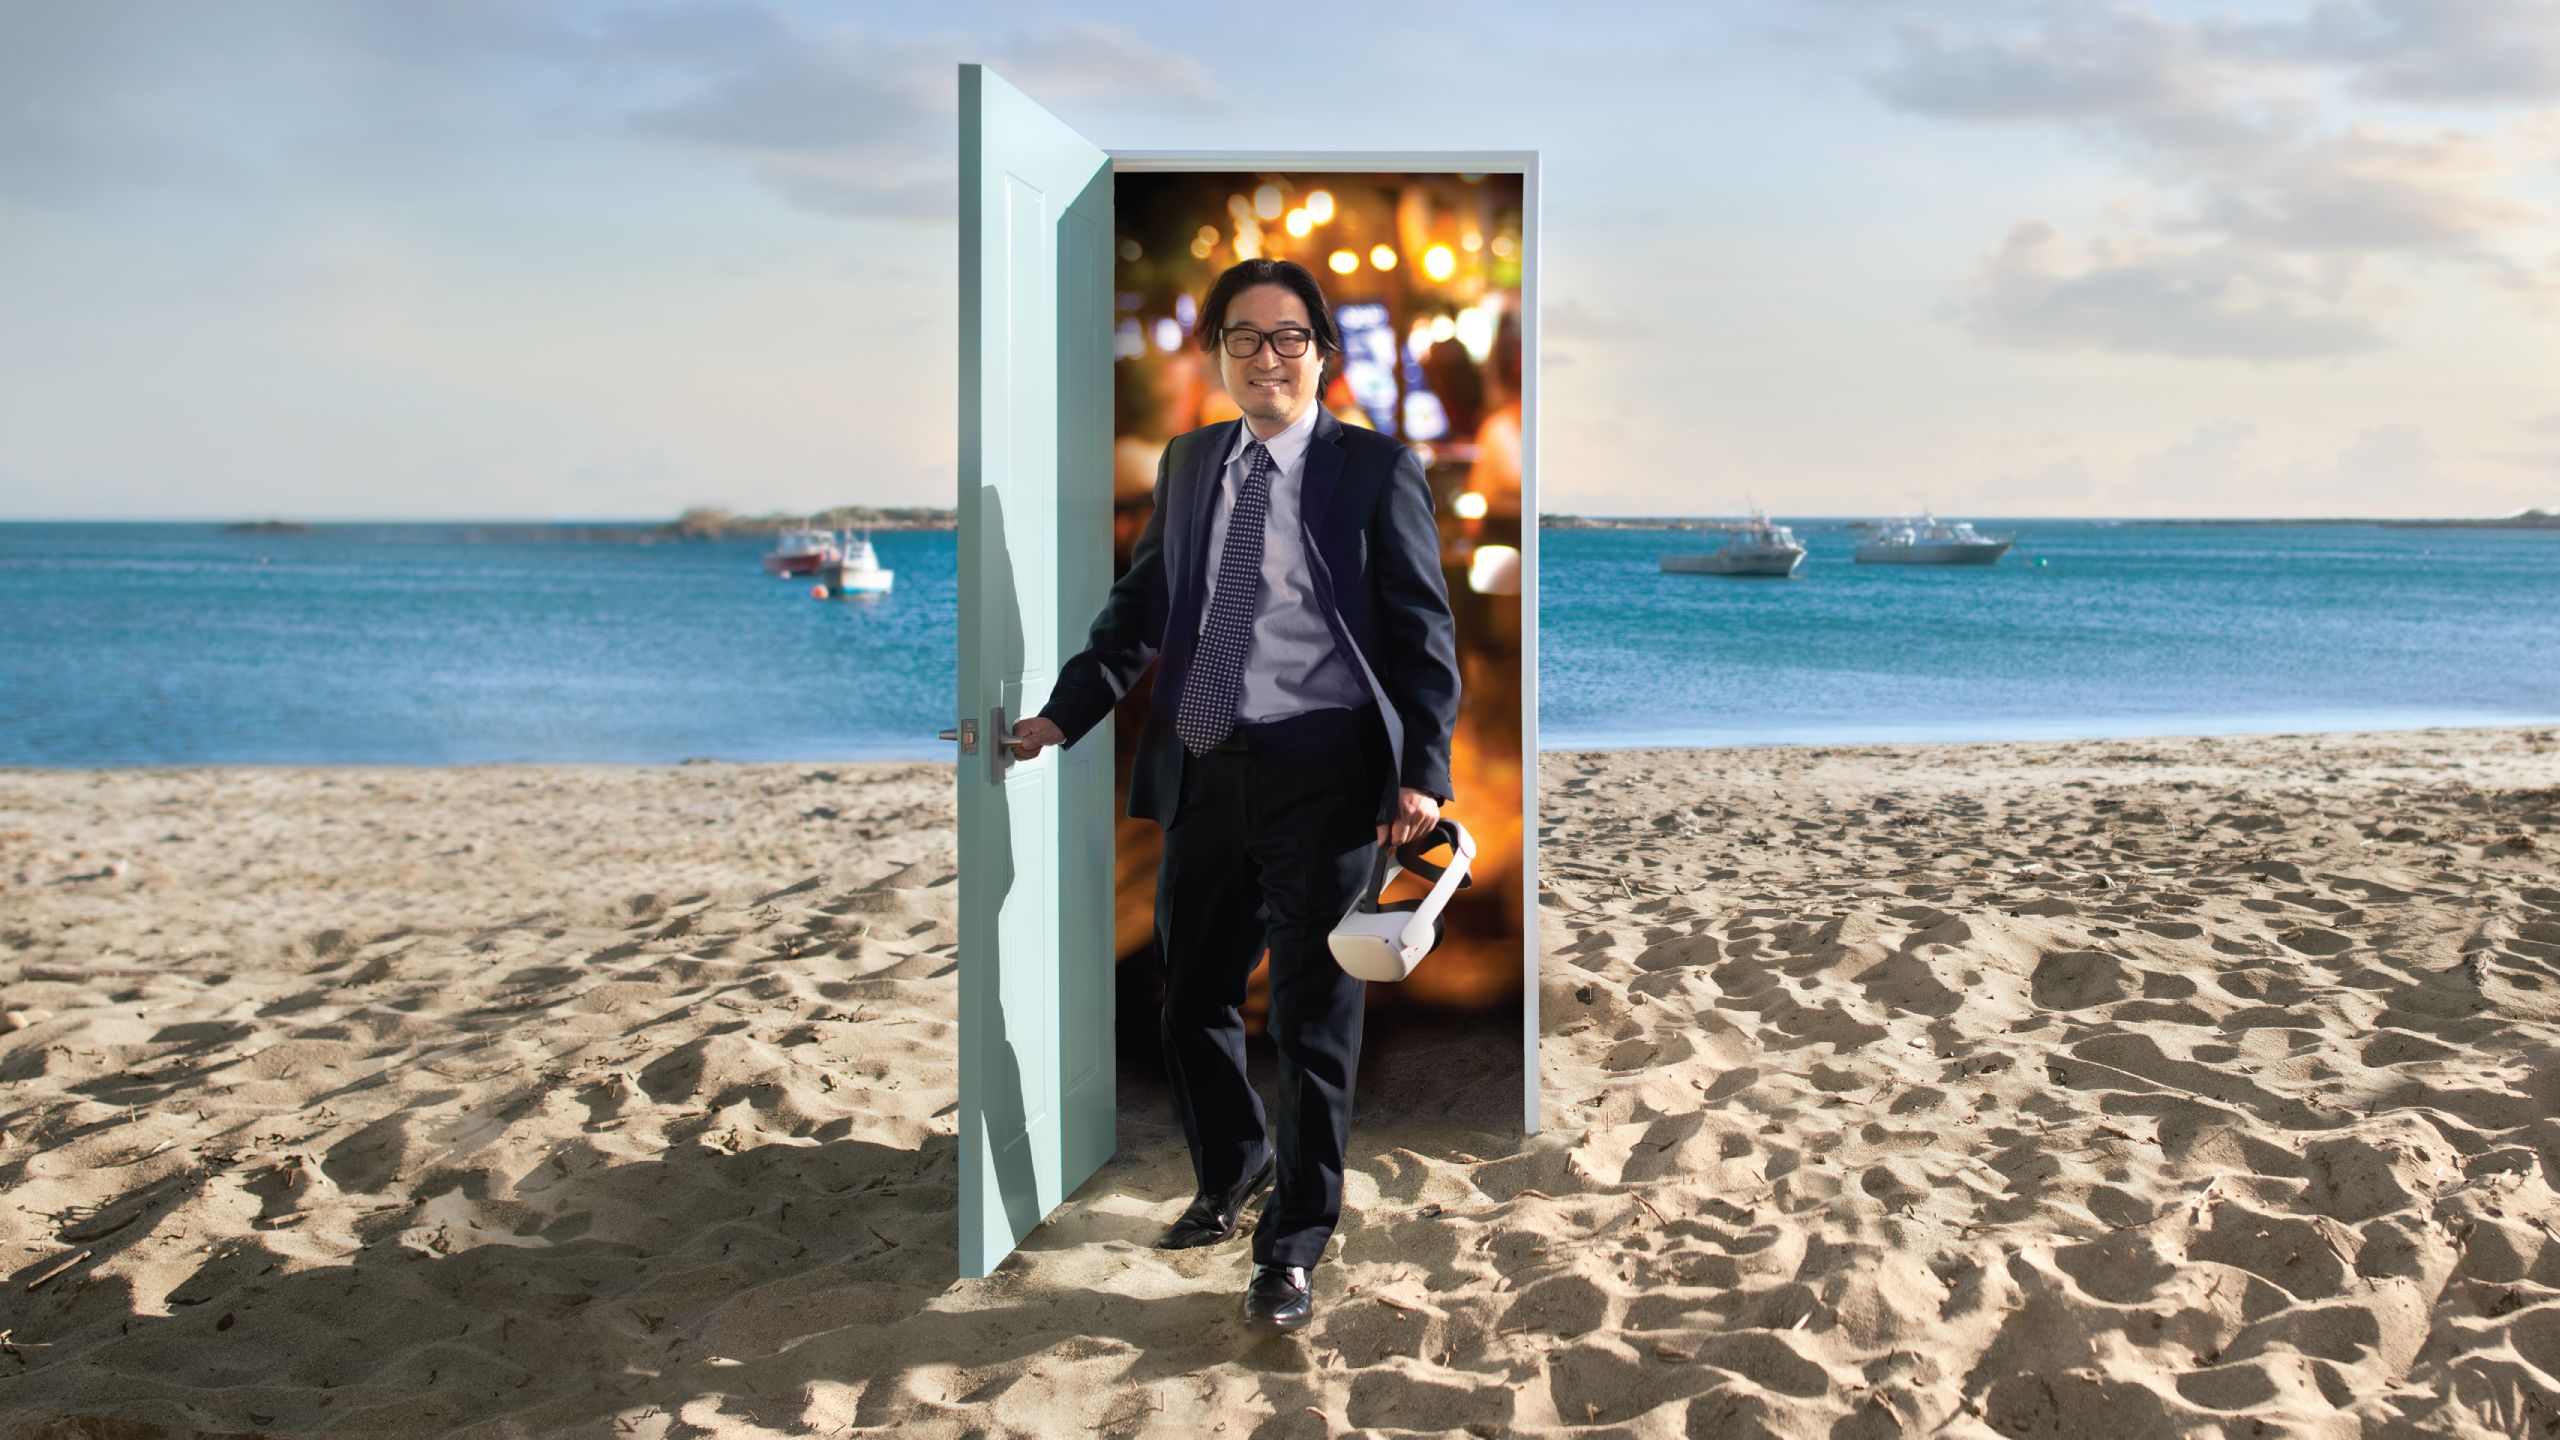 Dr Taehyun Rhee standing walking through a door from a restaurant onto a beach. He is wearing a suit and holding a VR headset